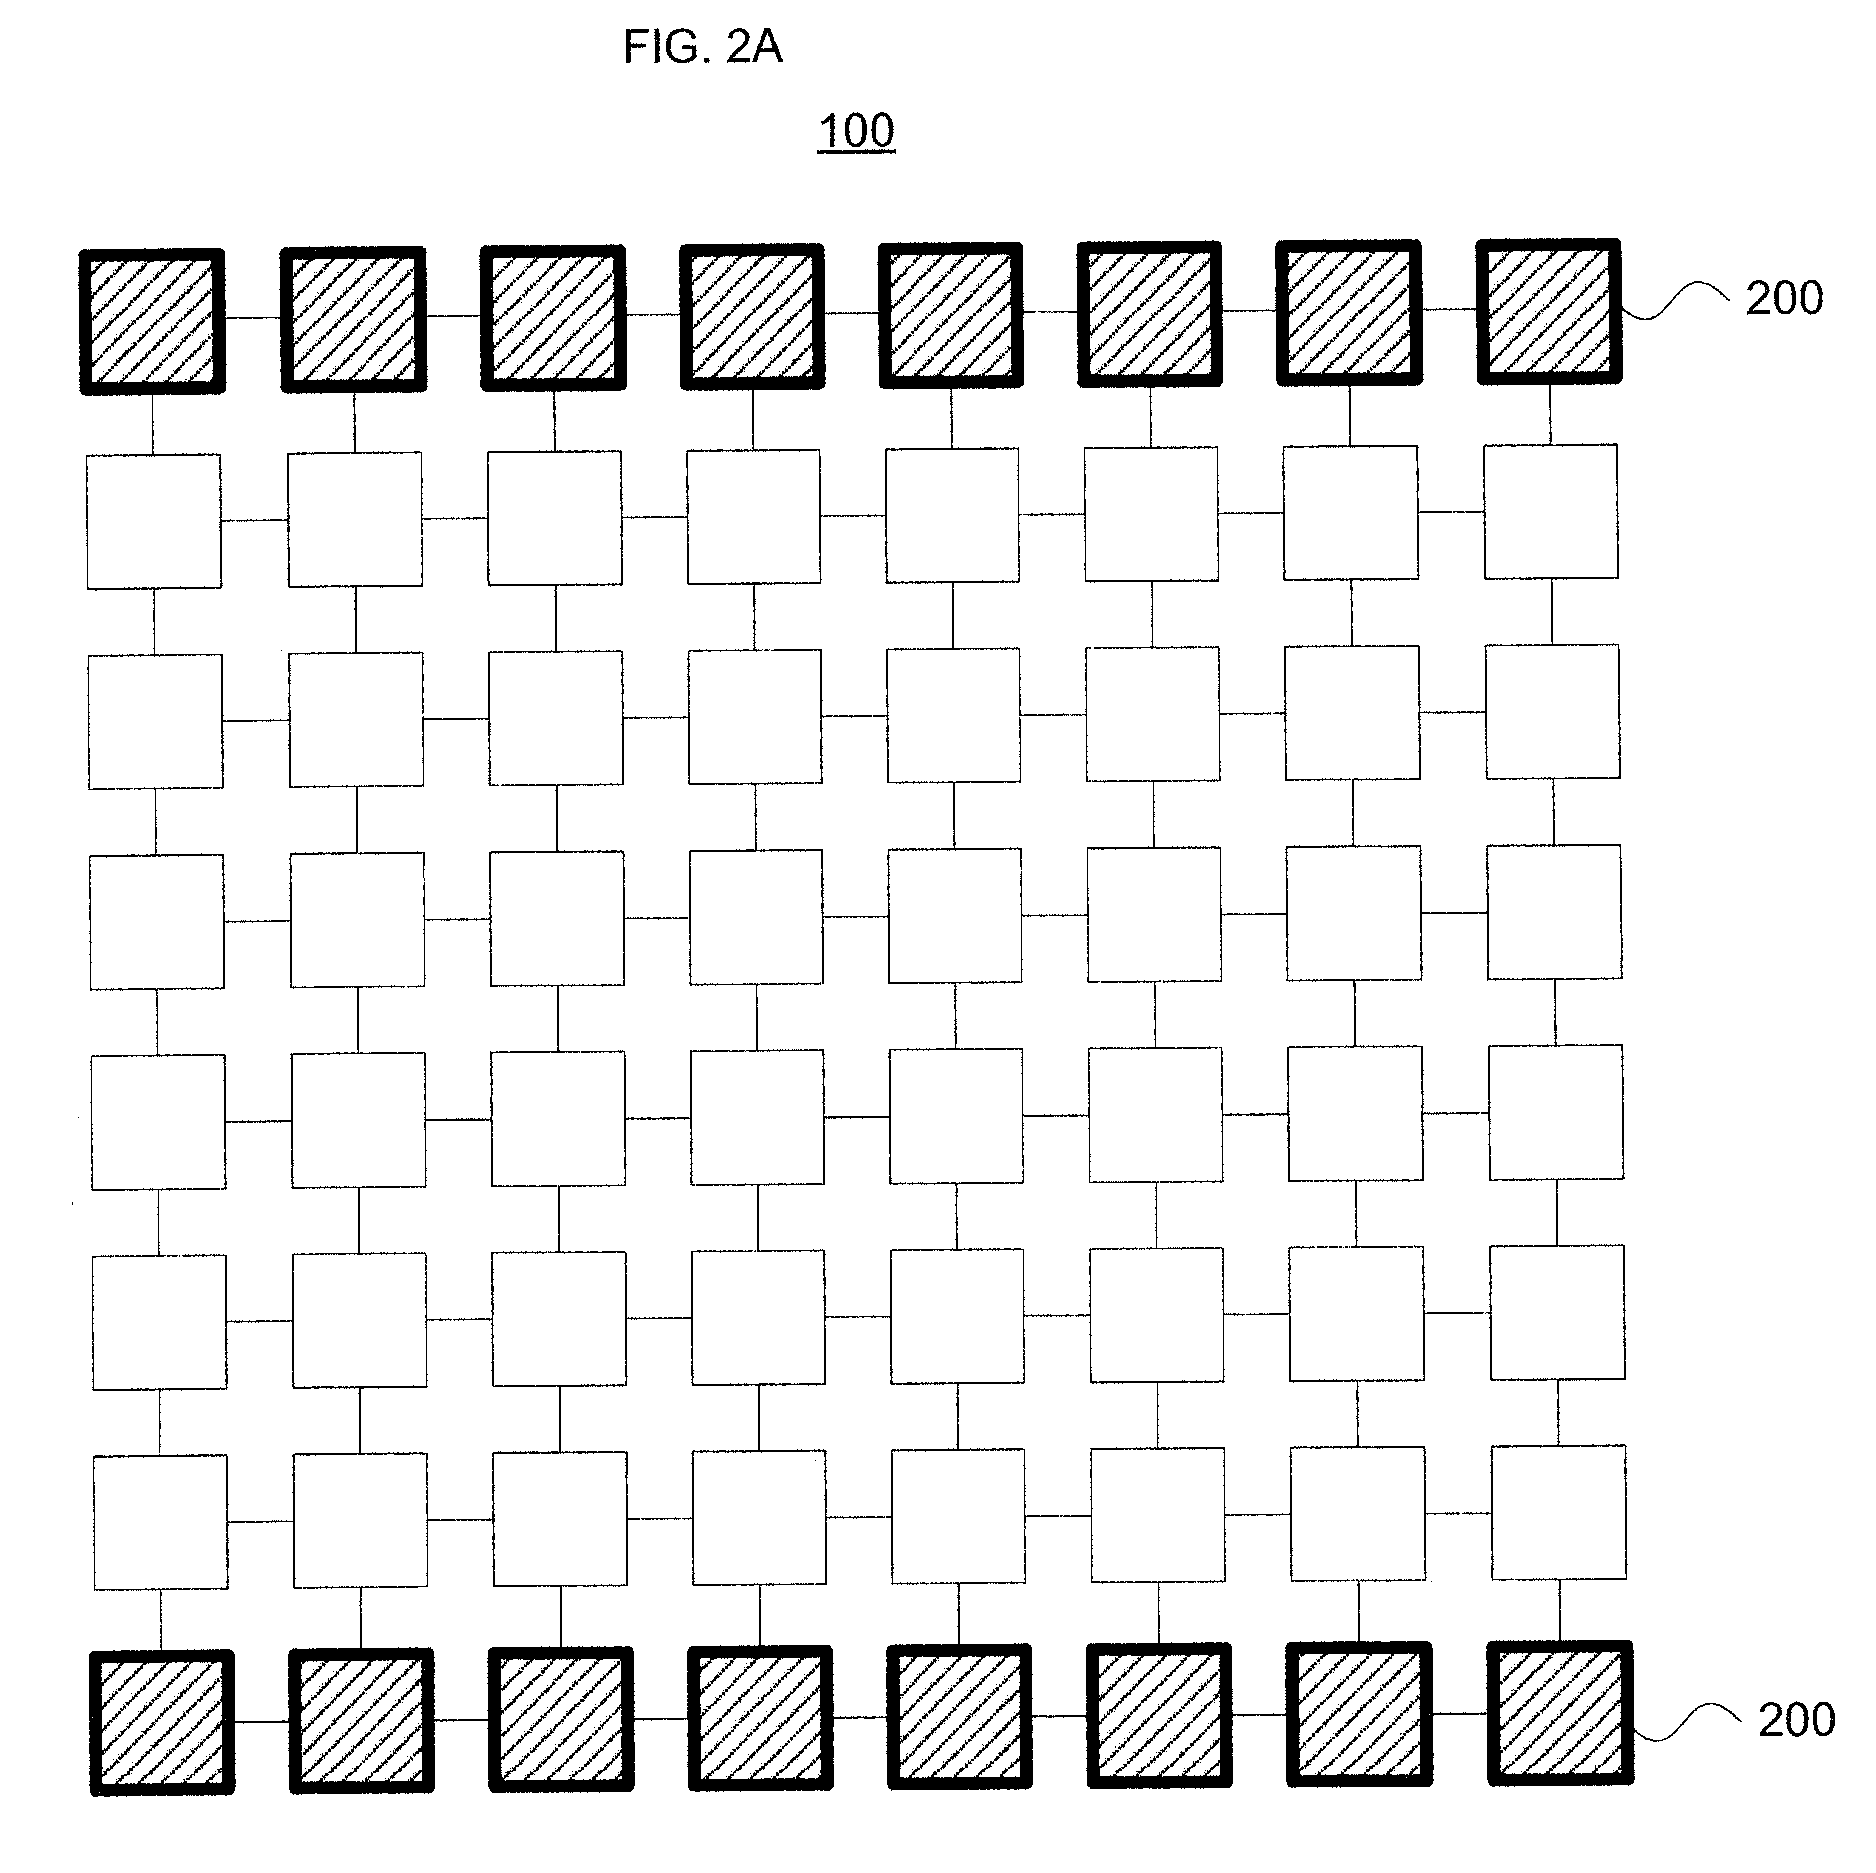 Method for optimizing memory controller configuration in multi-core processors using fitness metrics and channel loads